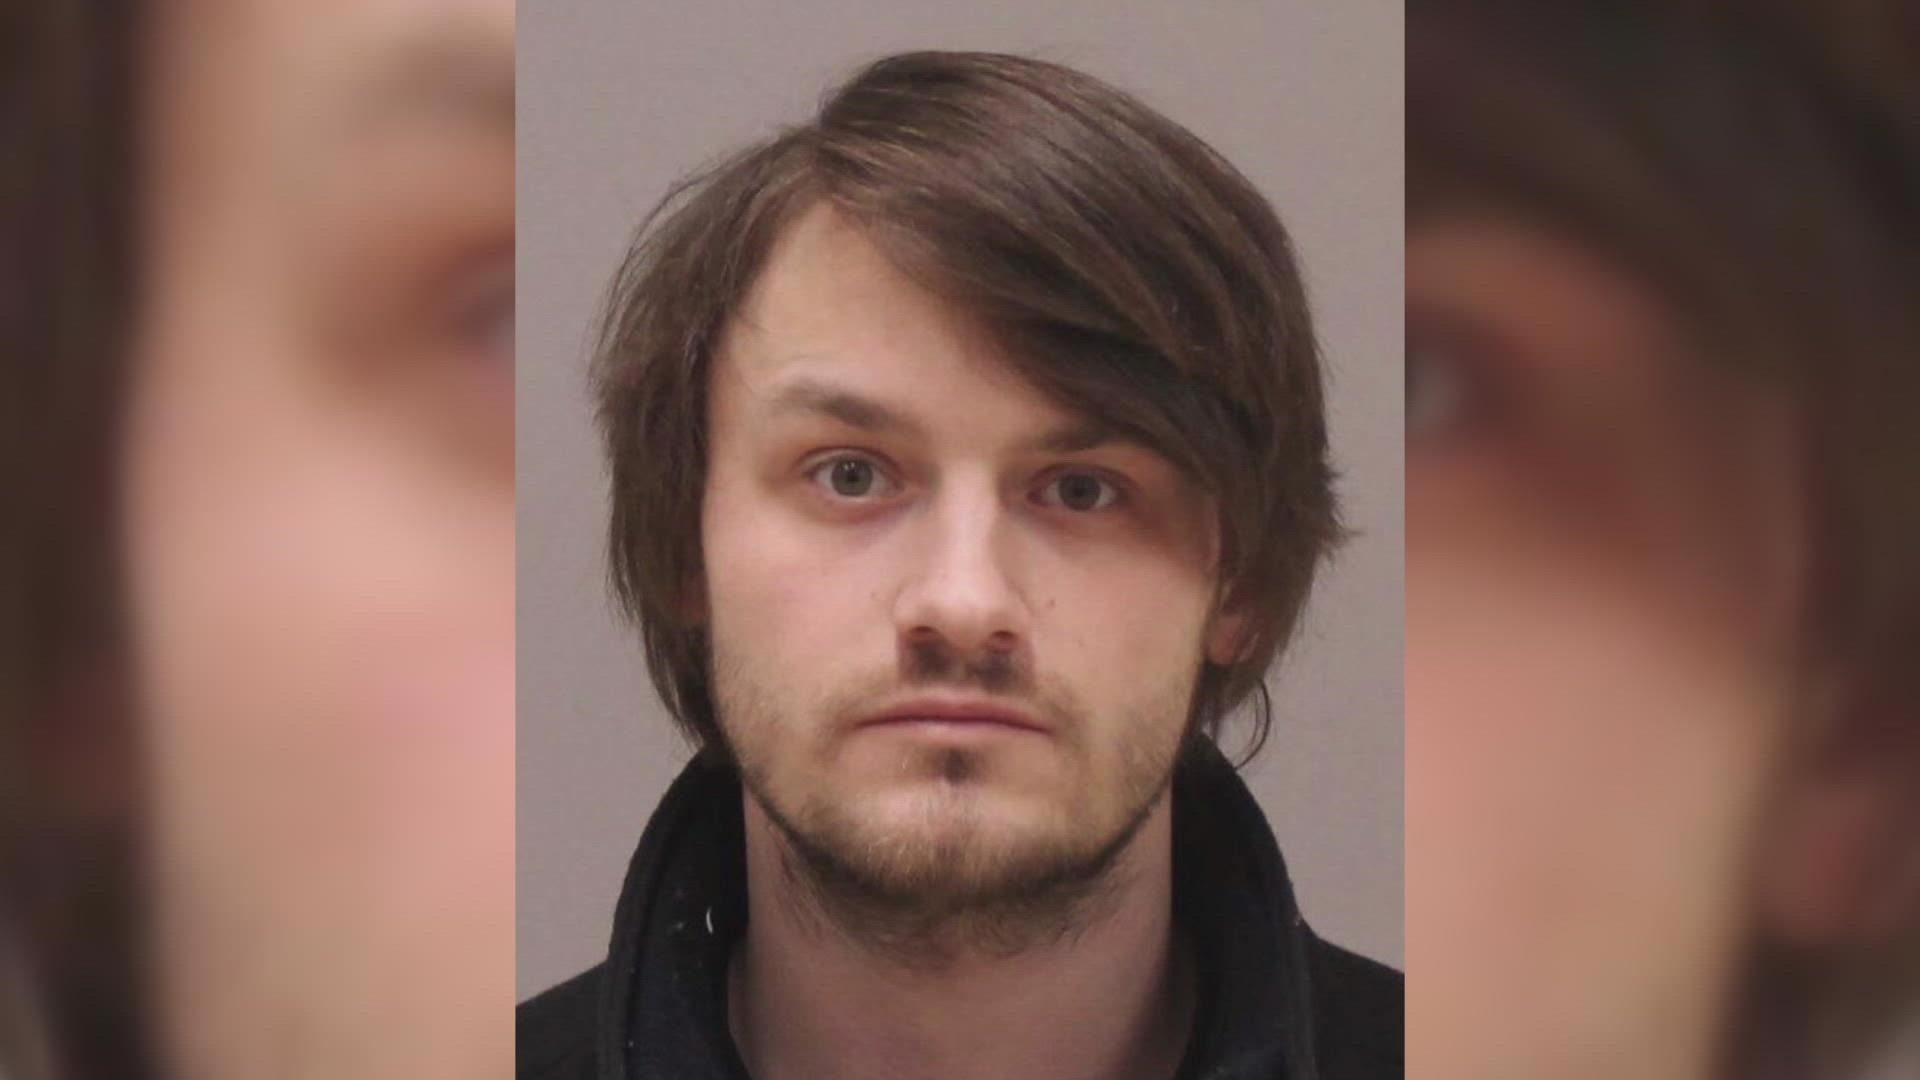 Alex John Radulovic, 23, was charged with one count of felony murder and one count of child abuse of the first degree, the Kent County Prosecutor's Office says.